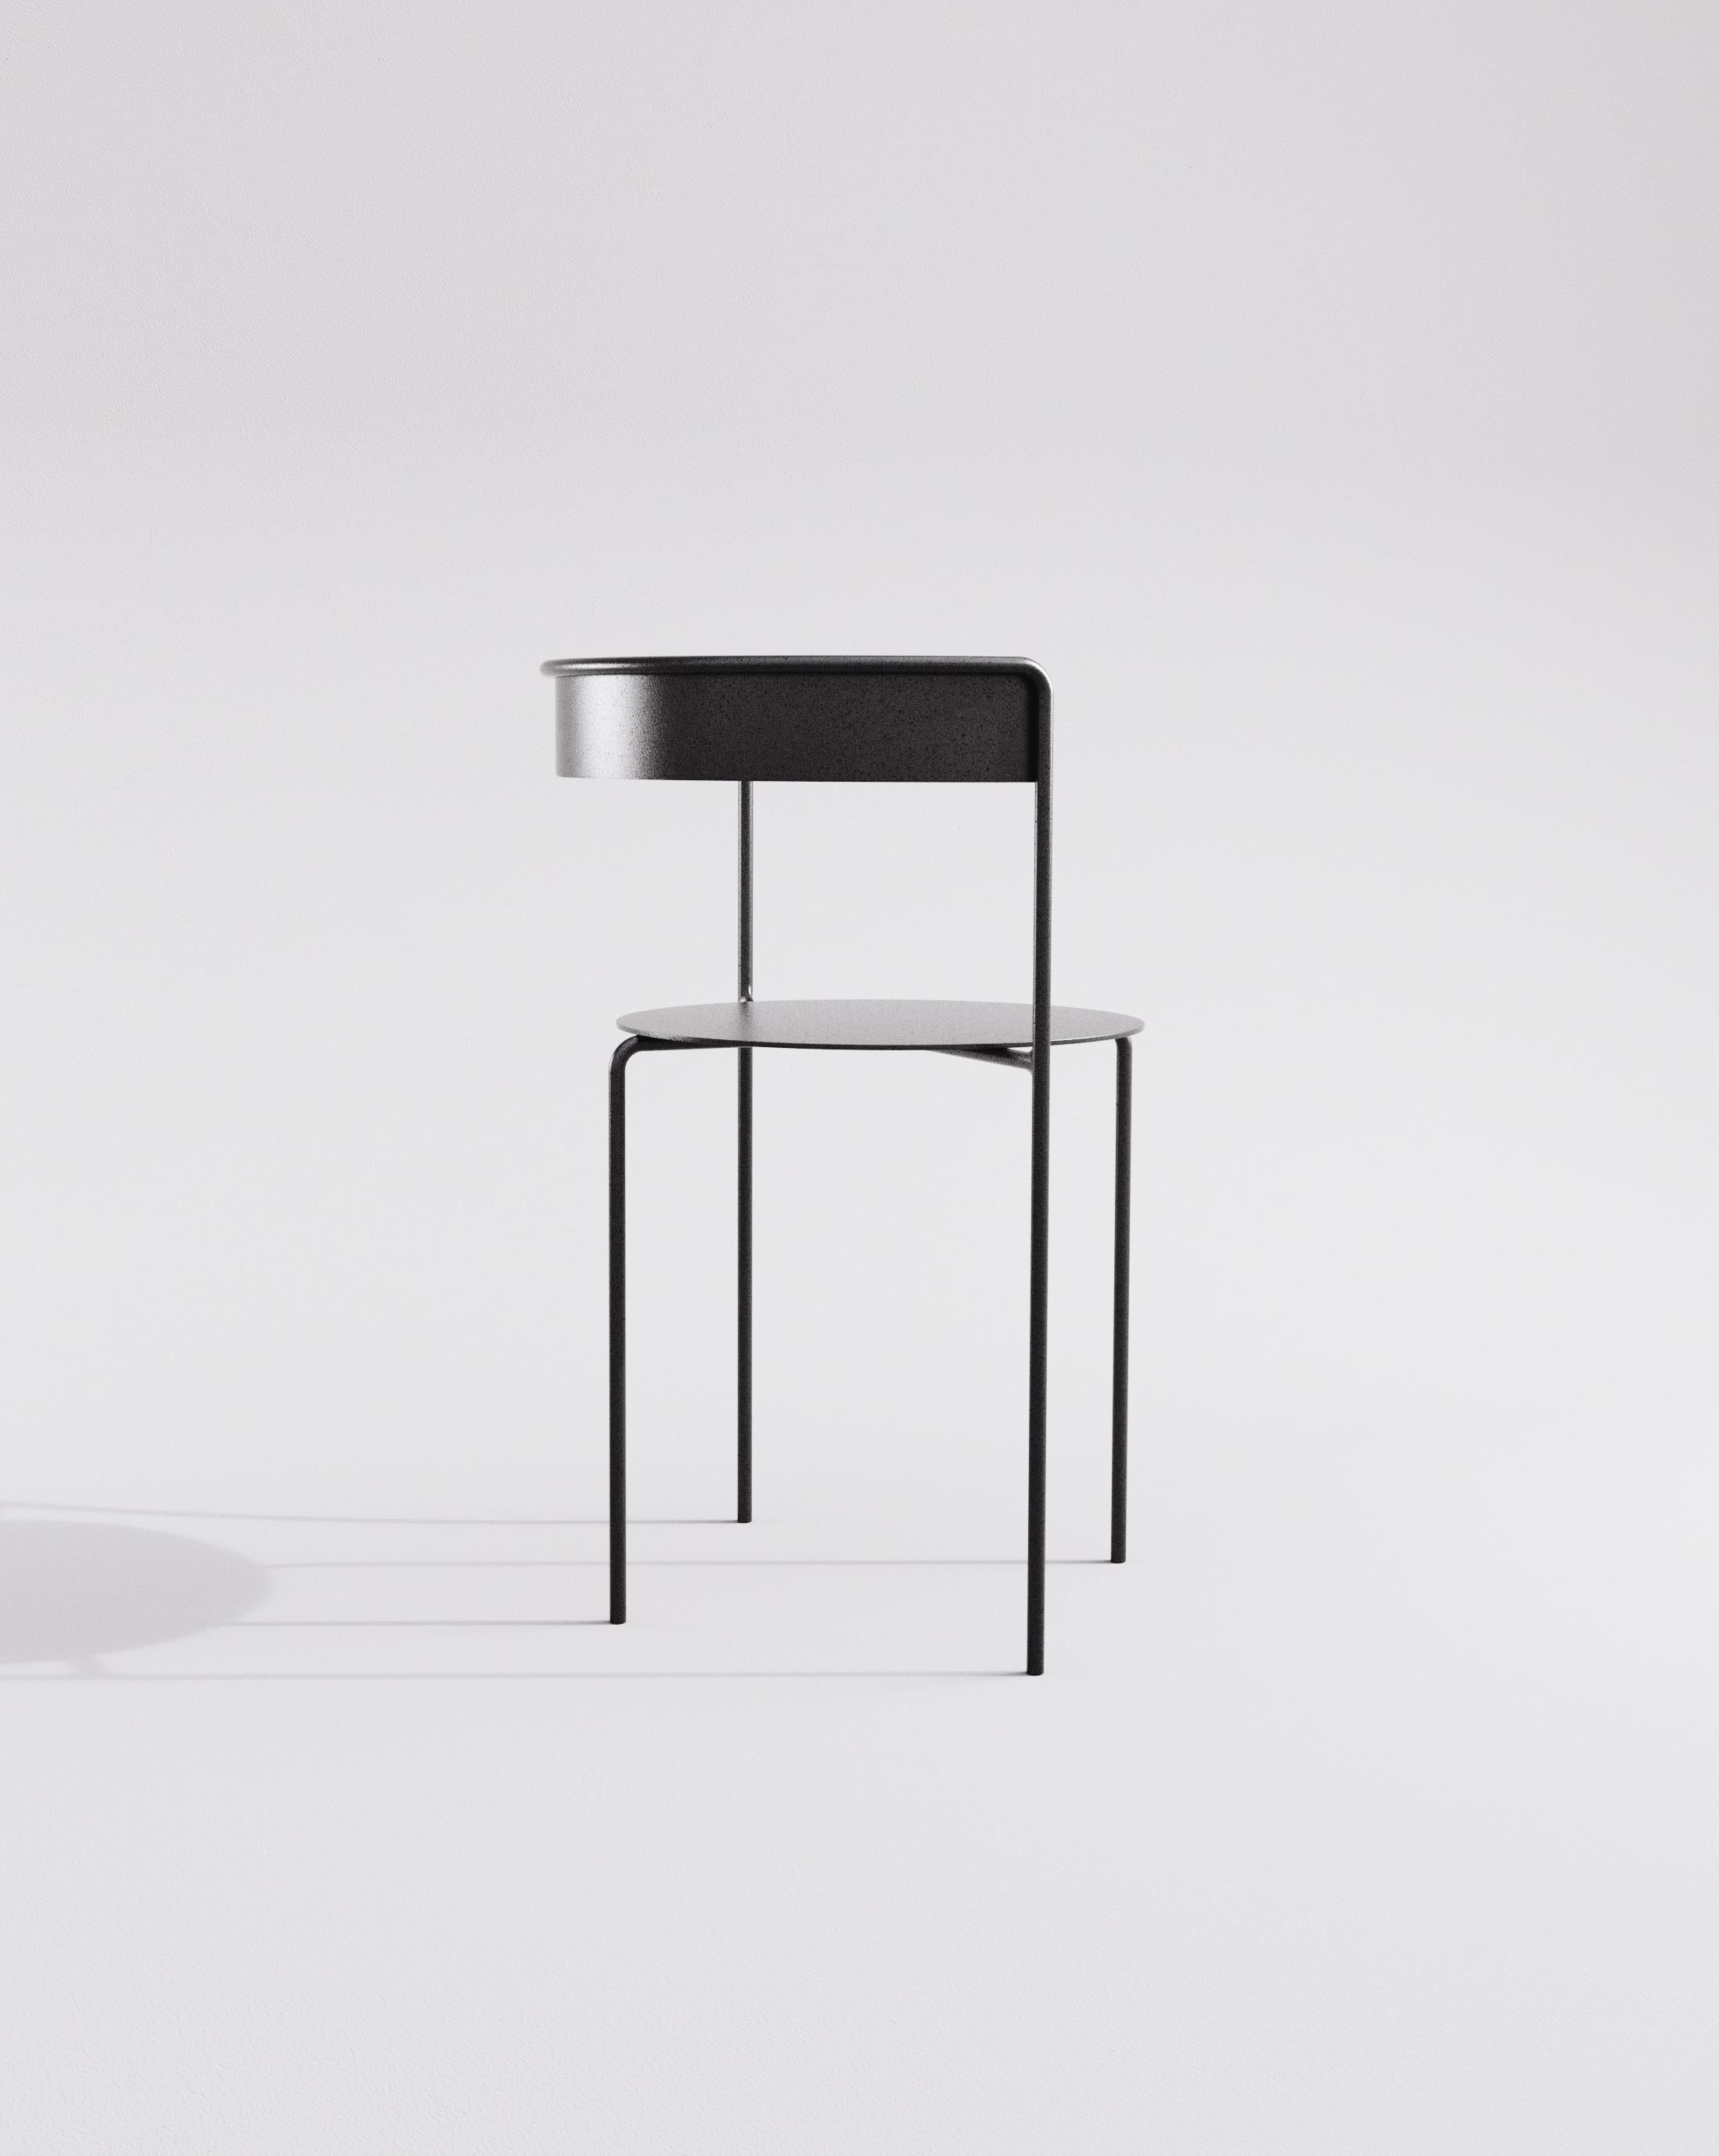 The motivation for the development of the Avoa Chair (MMXIII) is autotelia, the autonomous design discourse. The challenge was to think of an object as a quote, a resumption of the minimal elements that form a chair: small seat, economical design,